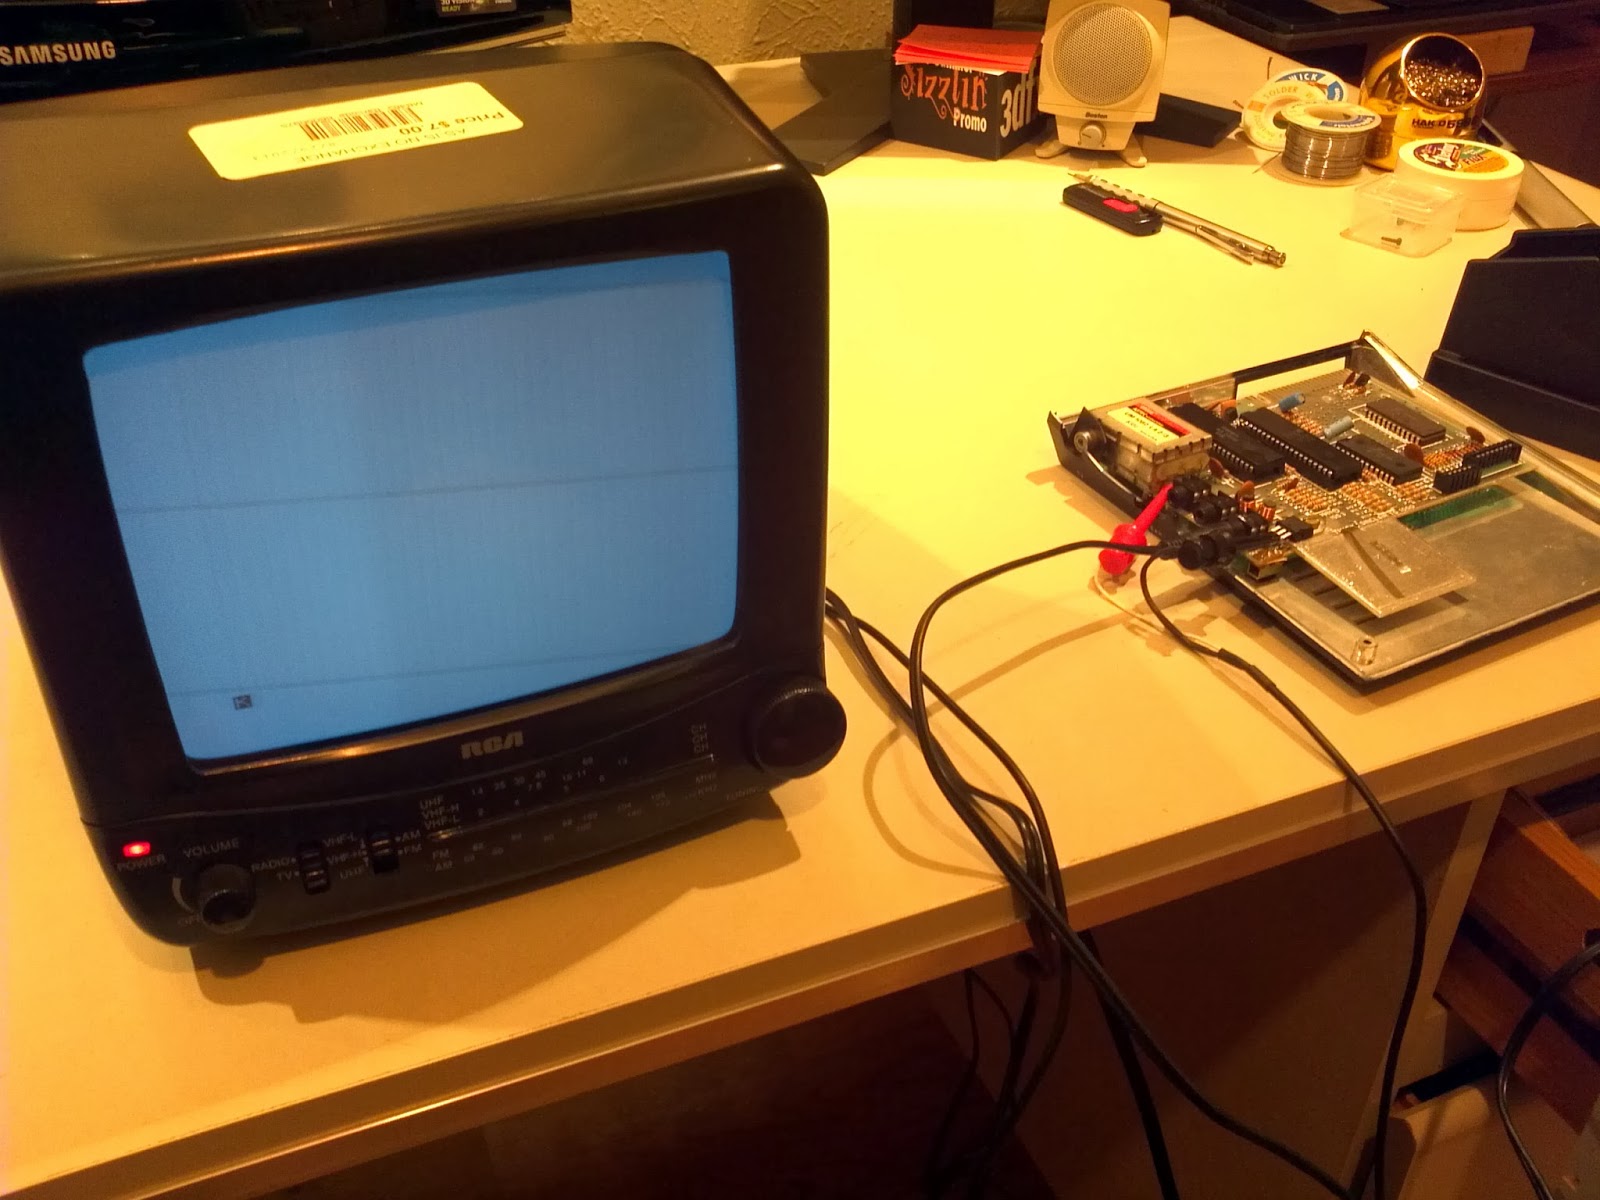 Sinclair ZX81 image on TV